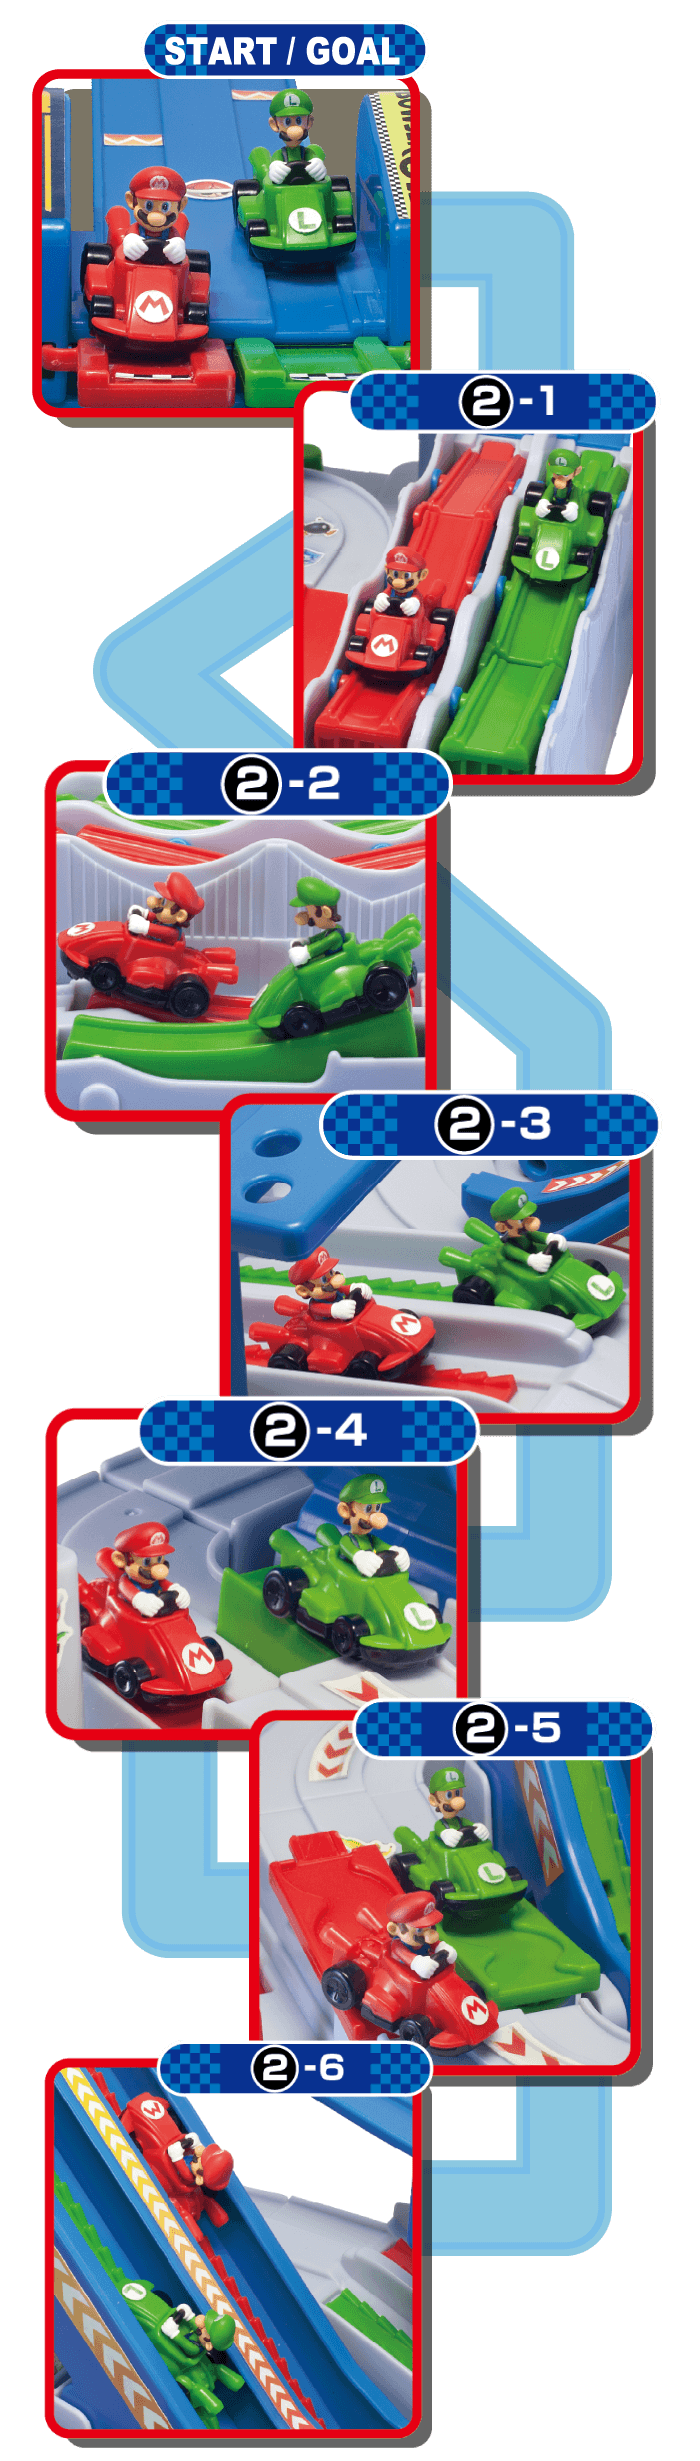 Epoch Everlasting Play-Super Mario Kart Racing Deluxe Racing Game-7390-Legacy Toys